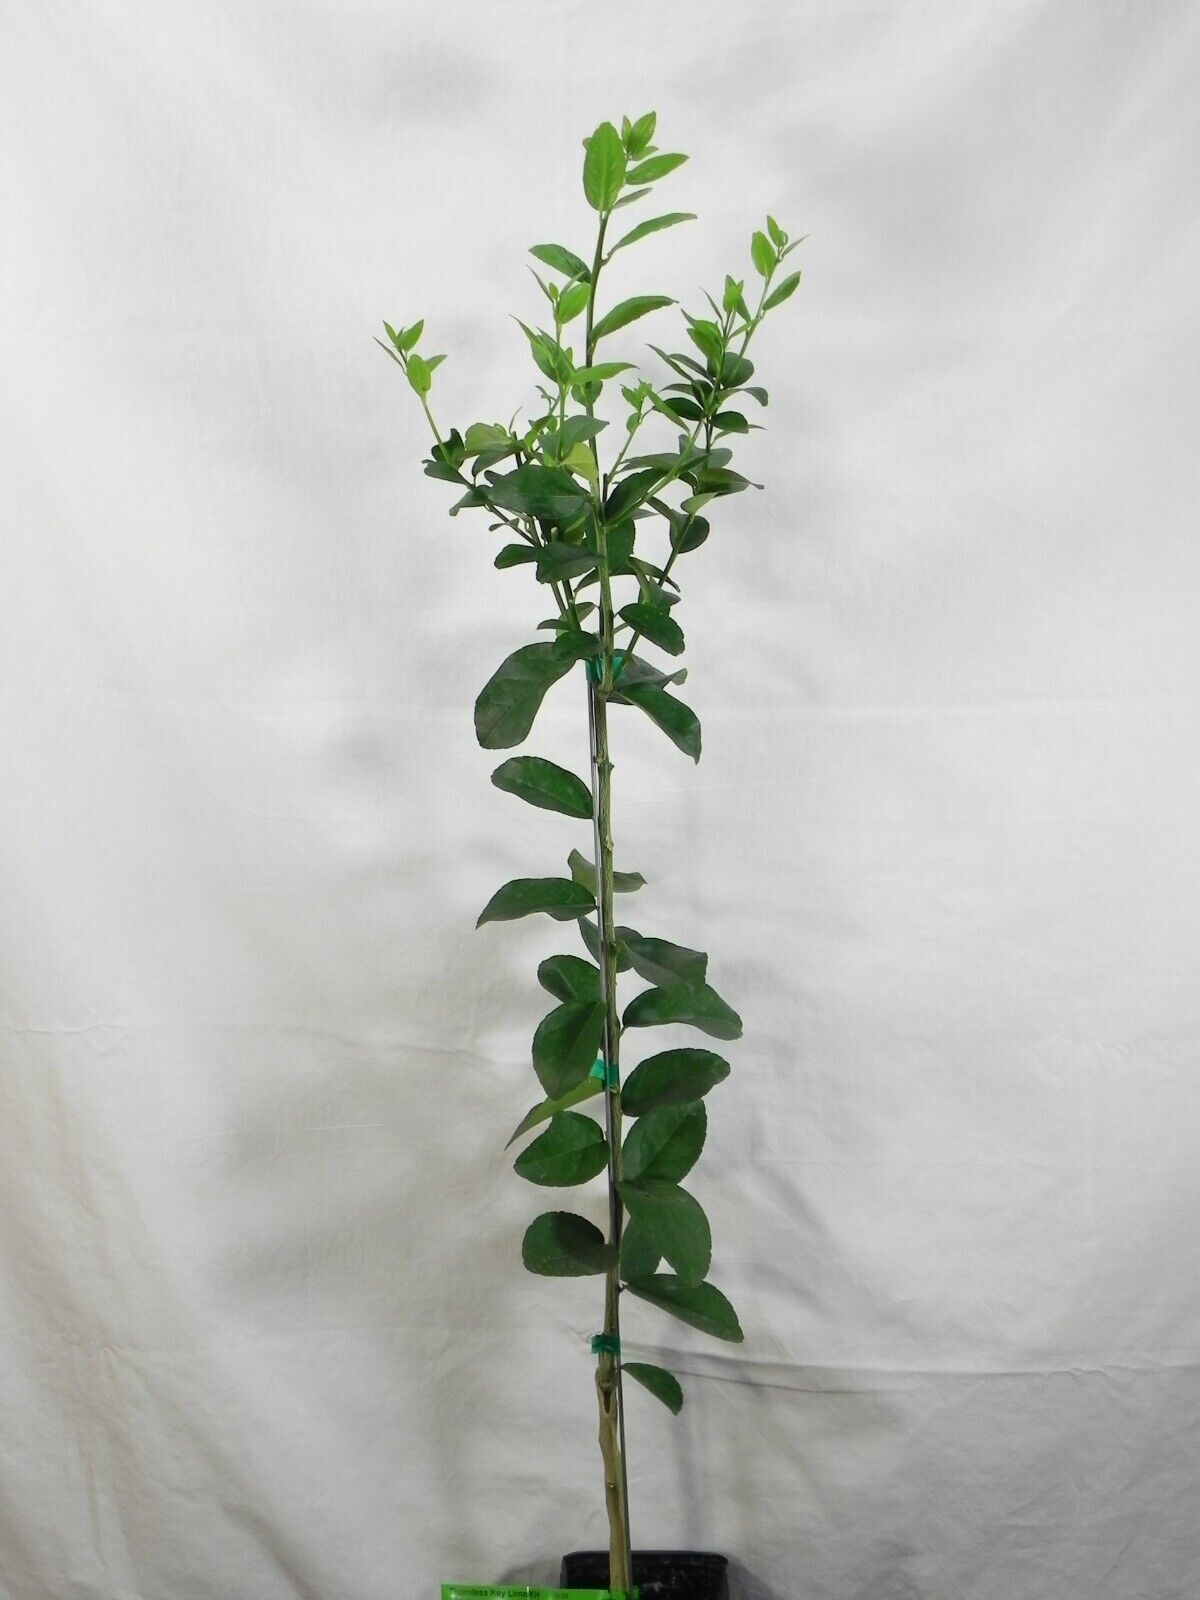 Thornless Mexican Key Lime - Semi-Dwarf - 18-36" Tall - Live Citrus Plant - H03 - $169.99